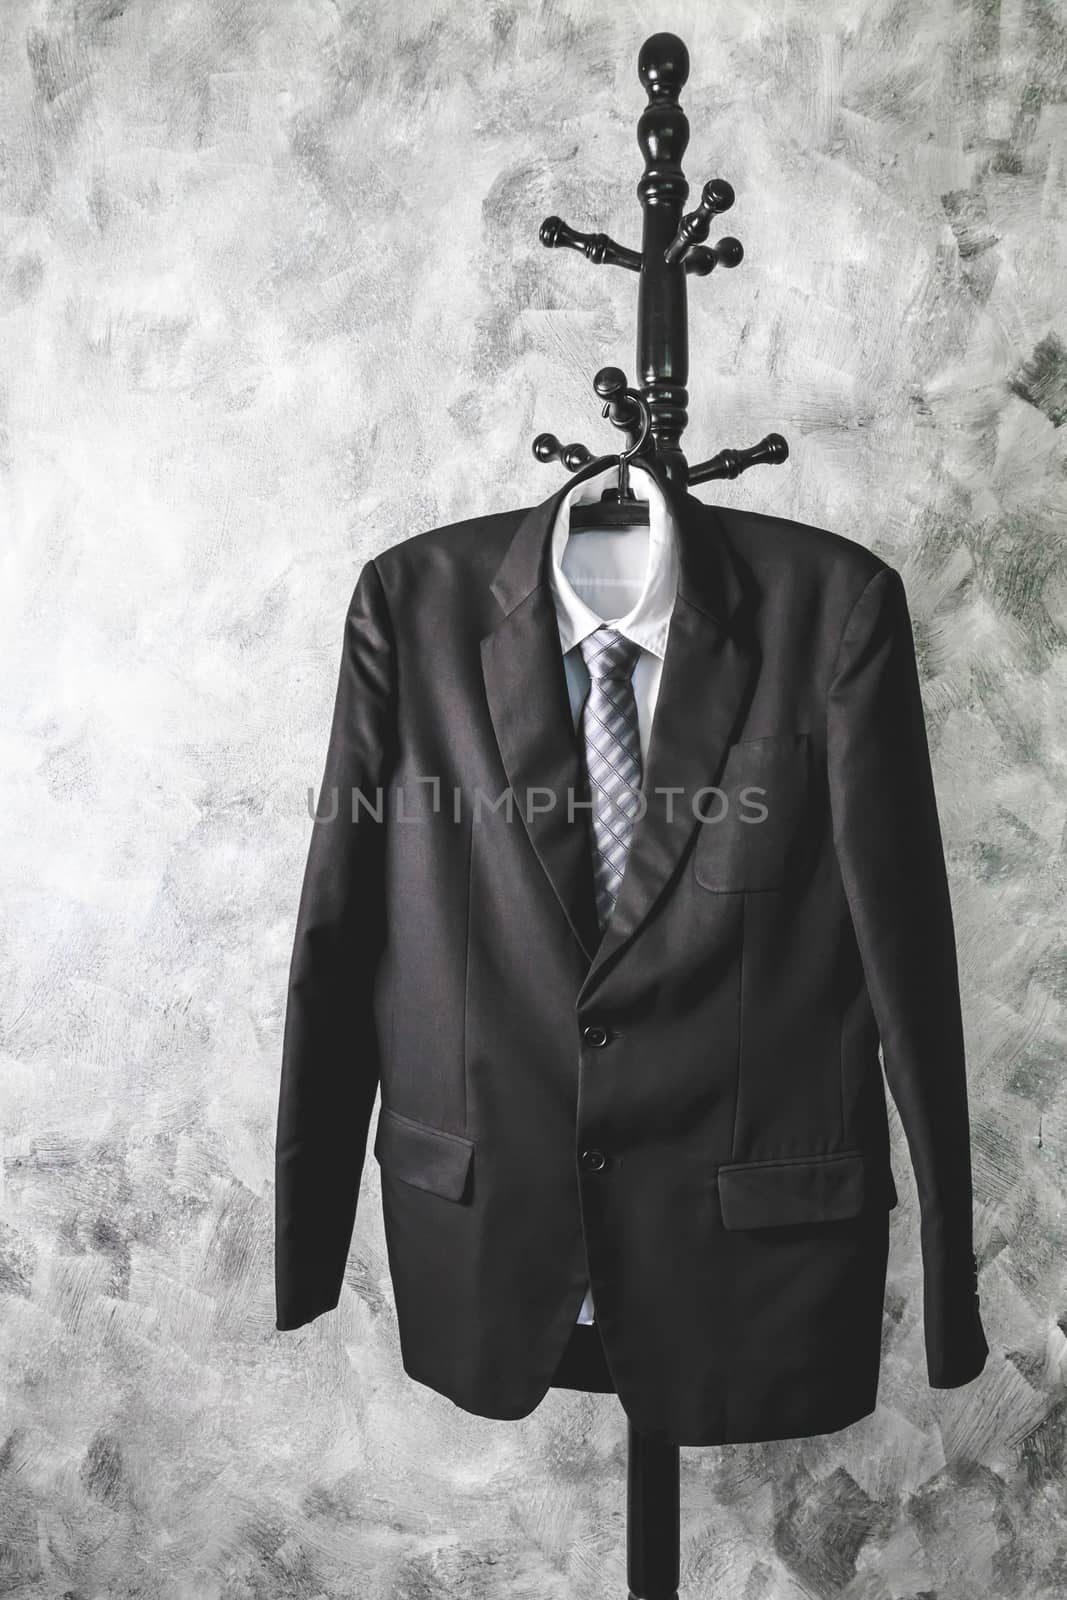 Black suit and tie and white shirt on grunge background.